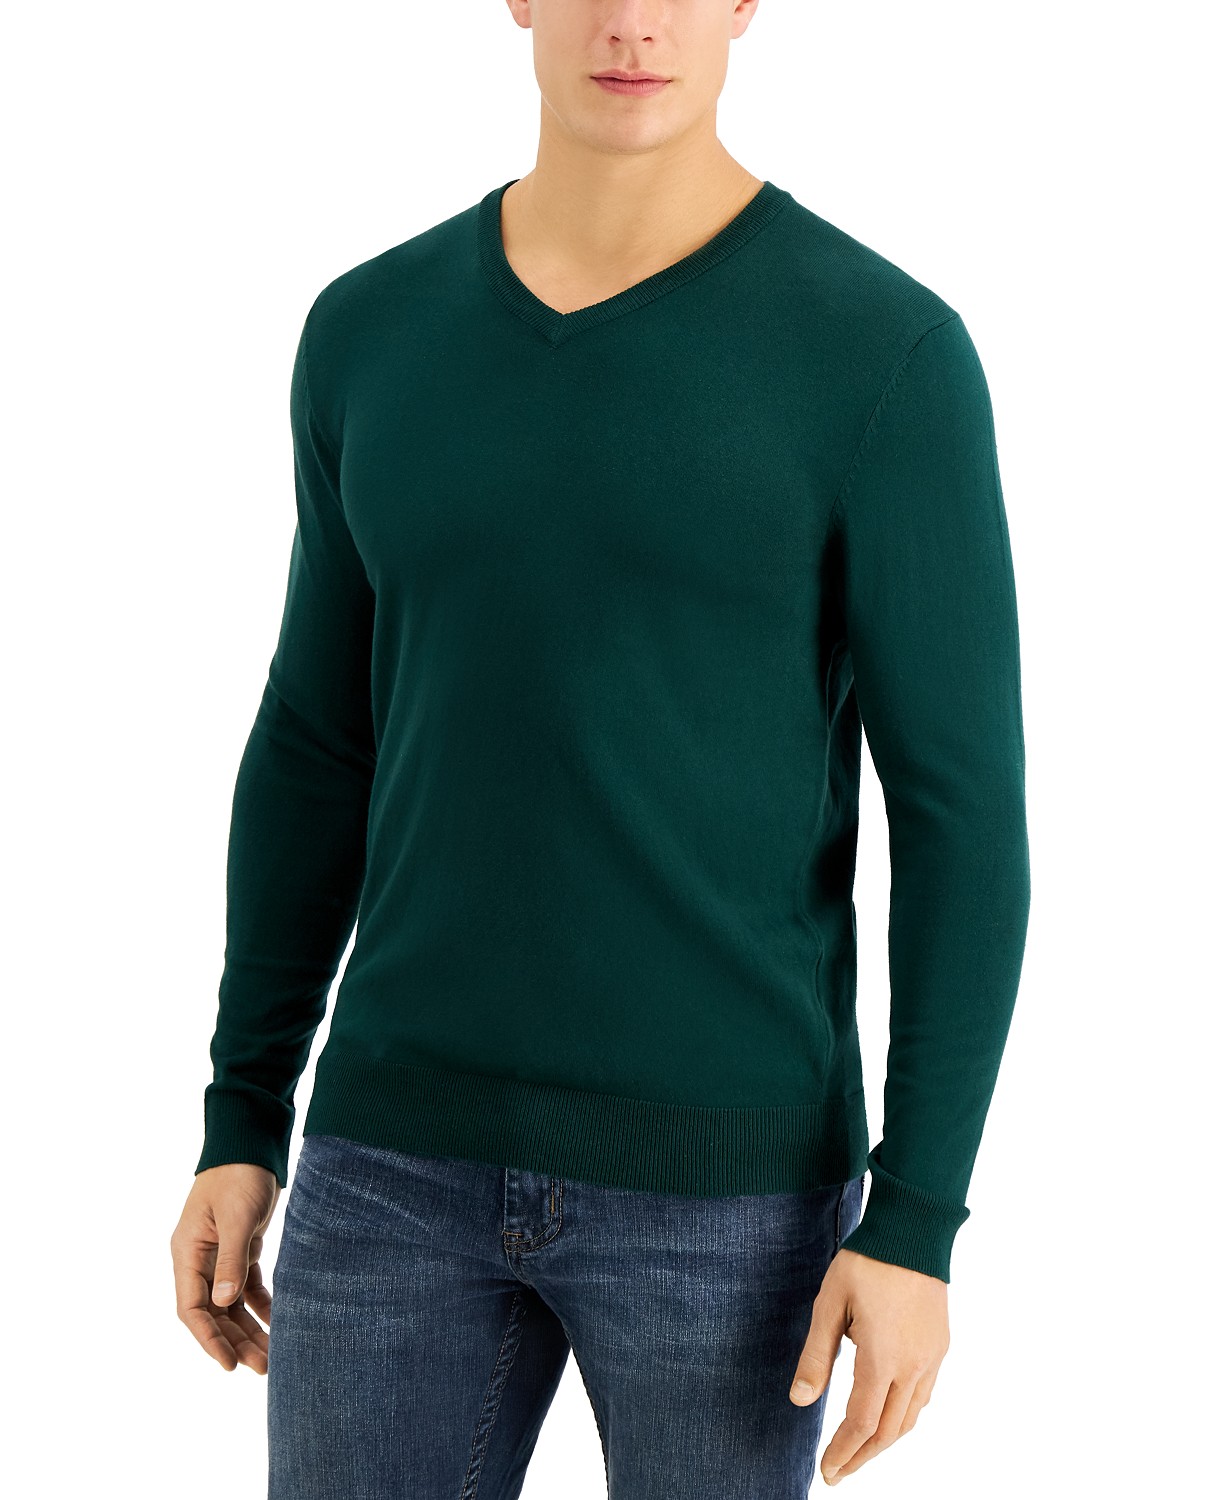 www.couturepoint.com-alfani-mens-green-solid-v-neck-long-sleeves-sweater